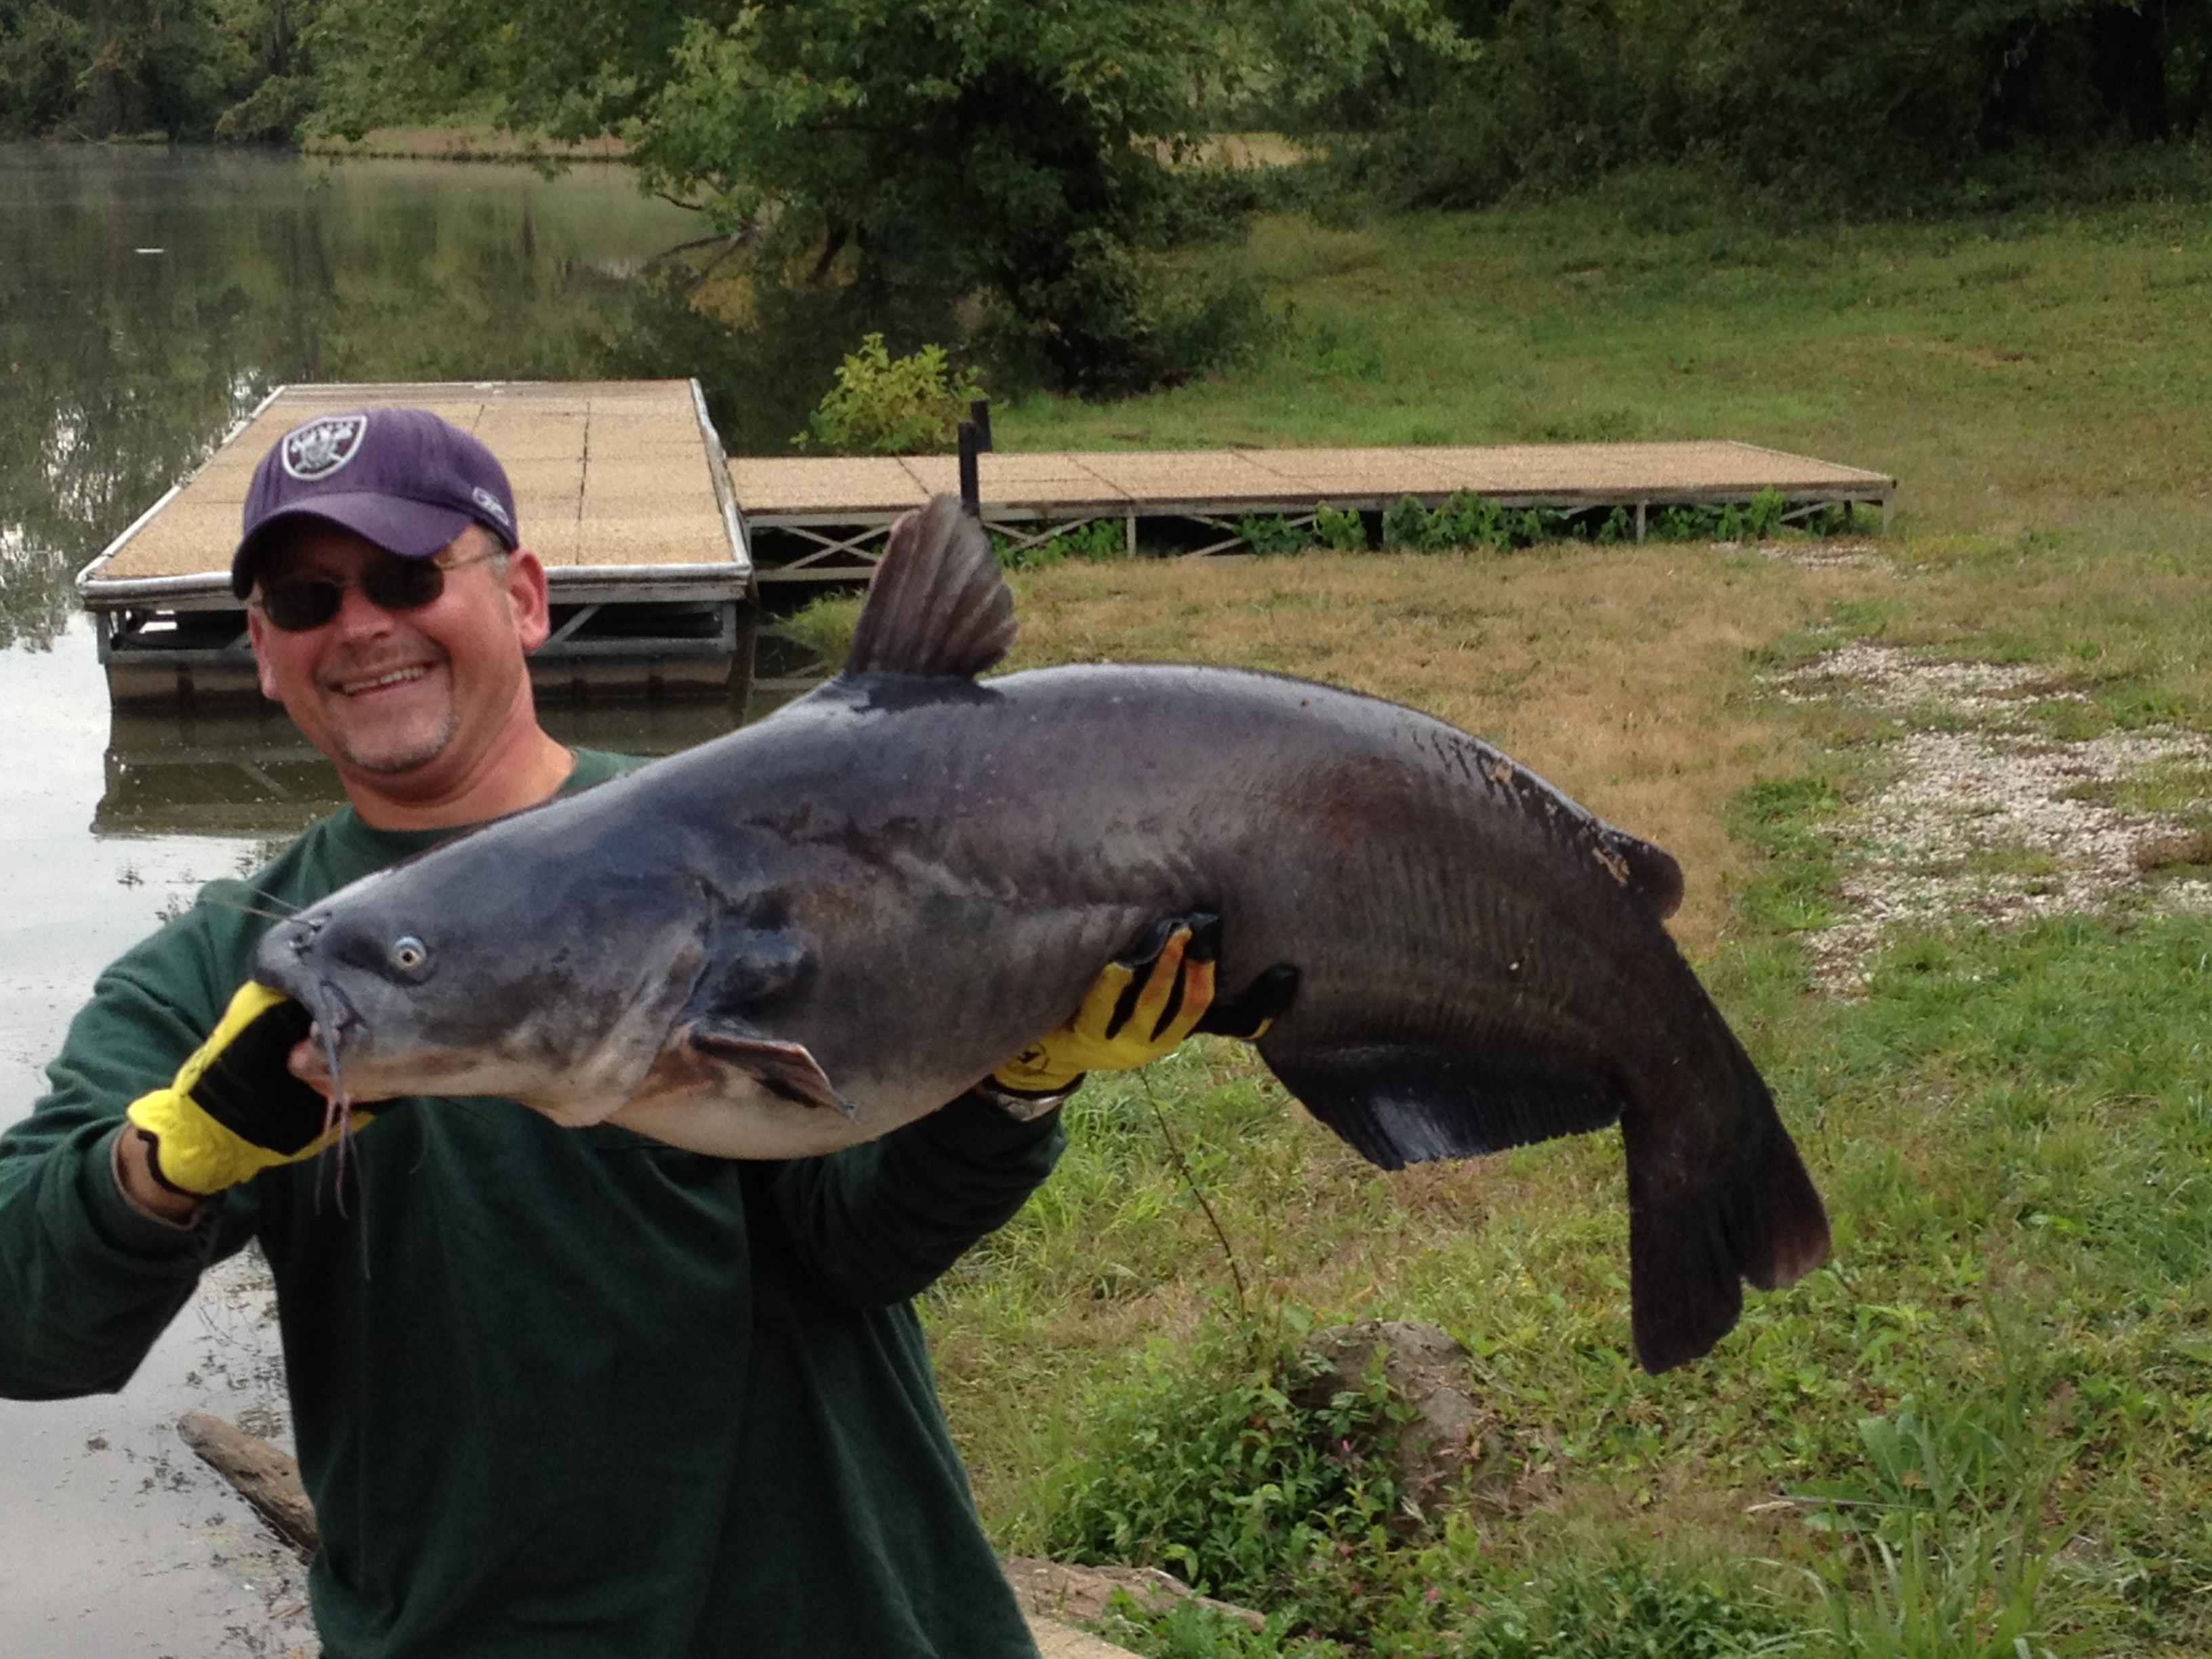 catfish was caught by Mark A. Foster of St. Albans, W.Va. Foster c...